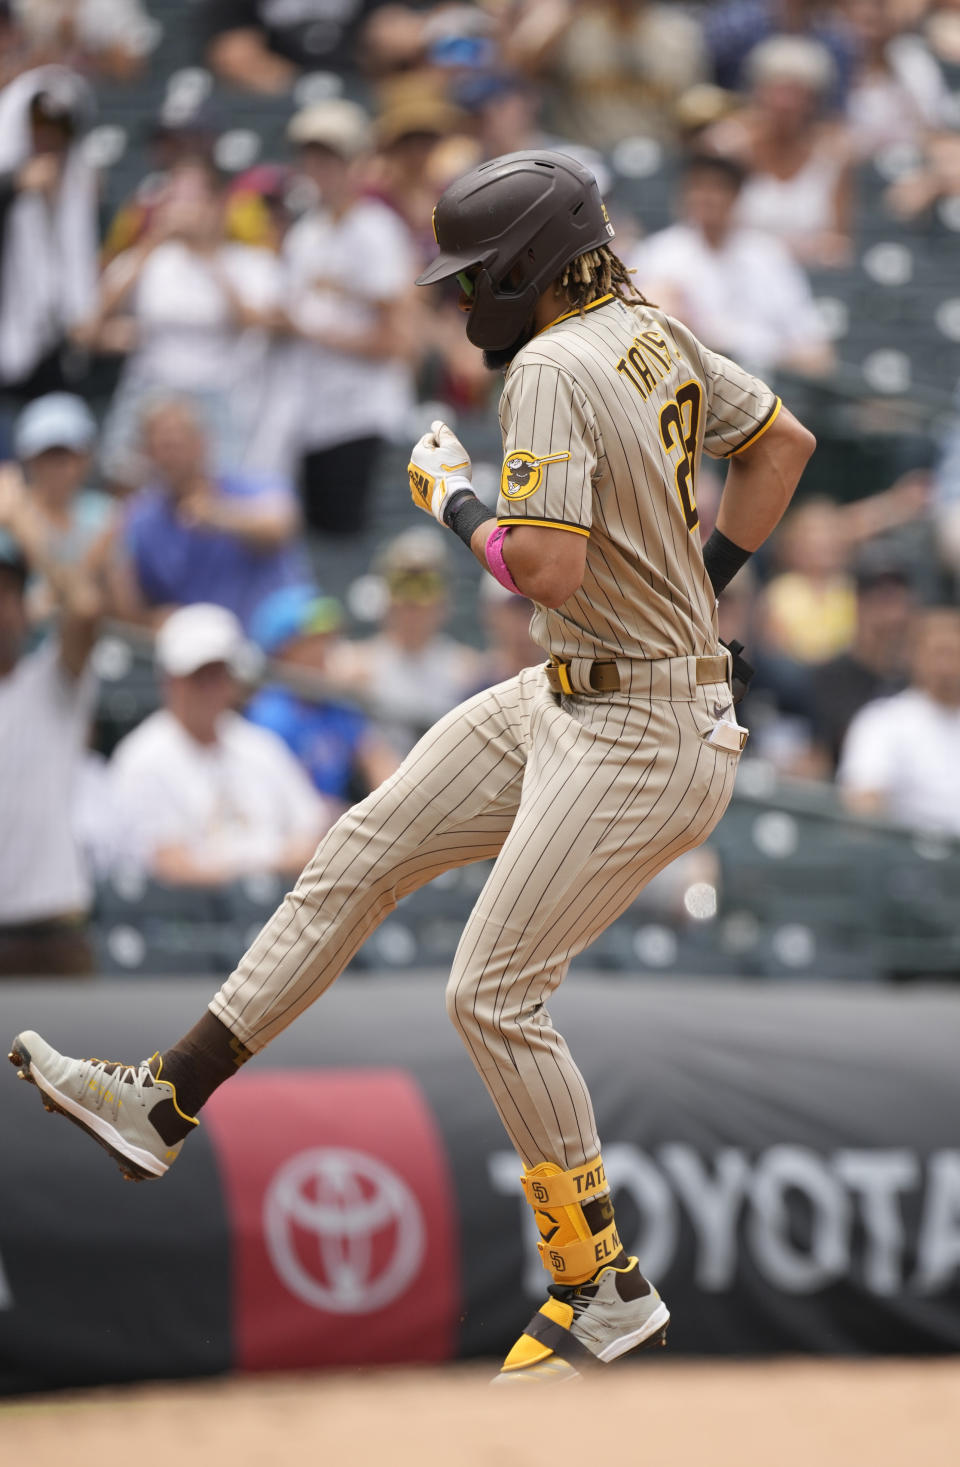 San Diego Padres' Fernando Tatis Jr., stops to make a jump before third base as he circles the bases after hitting a solo home run in the third inning of a baseball game Wednesday, June 16, 2021, in Denver. (AP Photo/David Zalubowski)